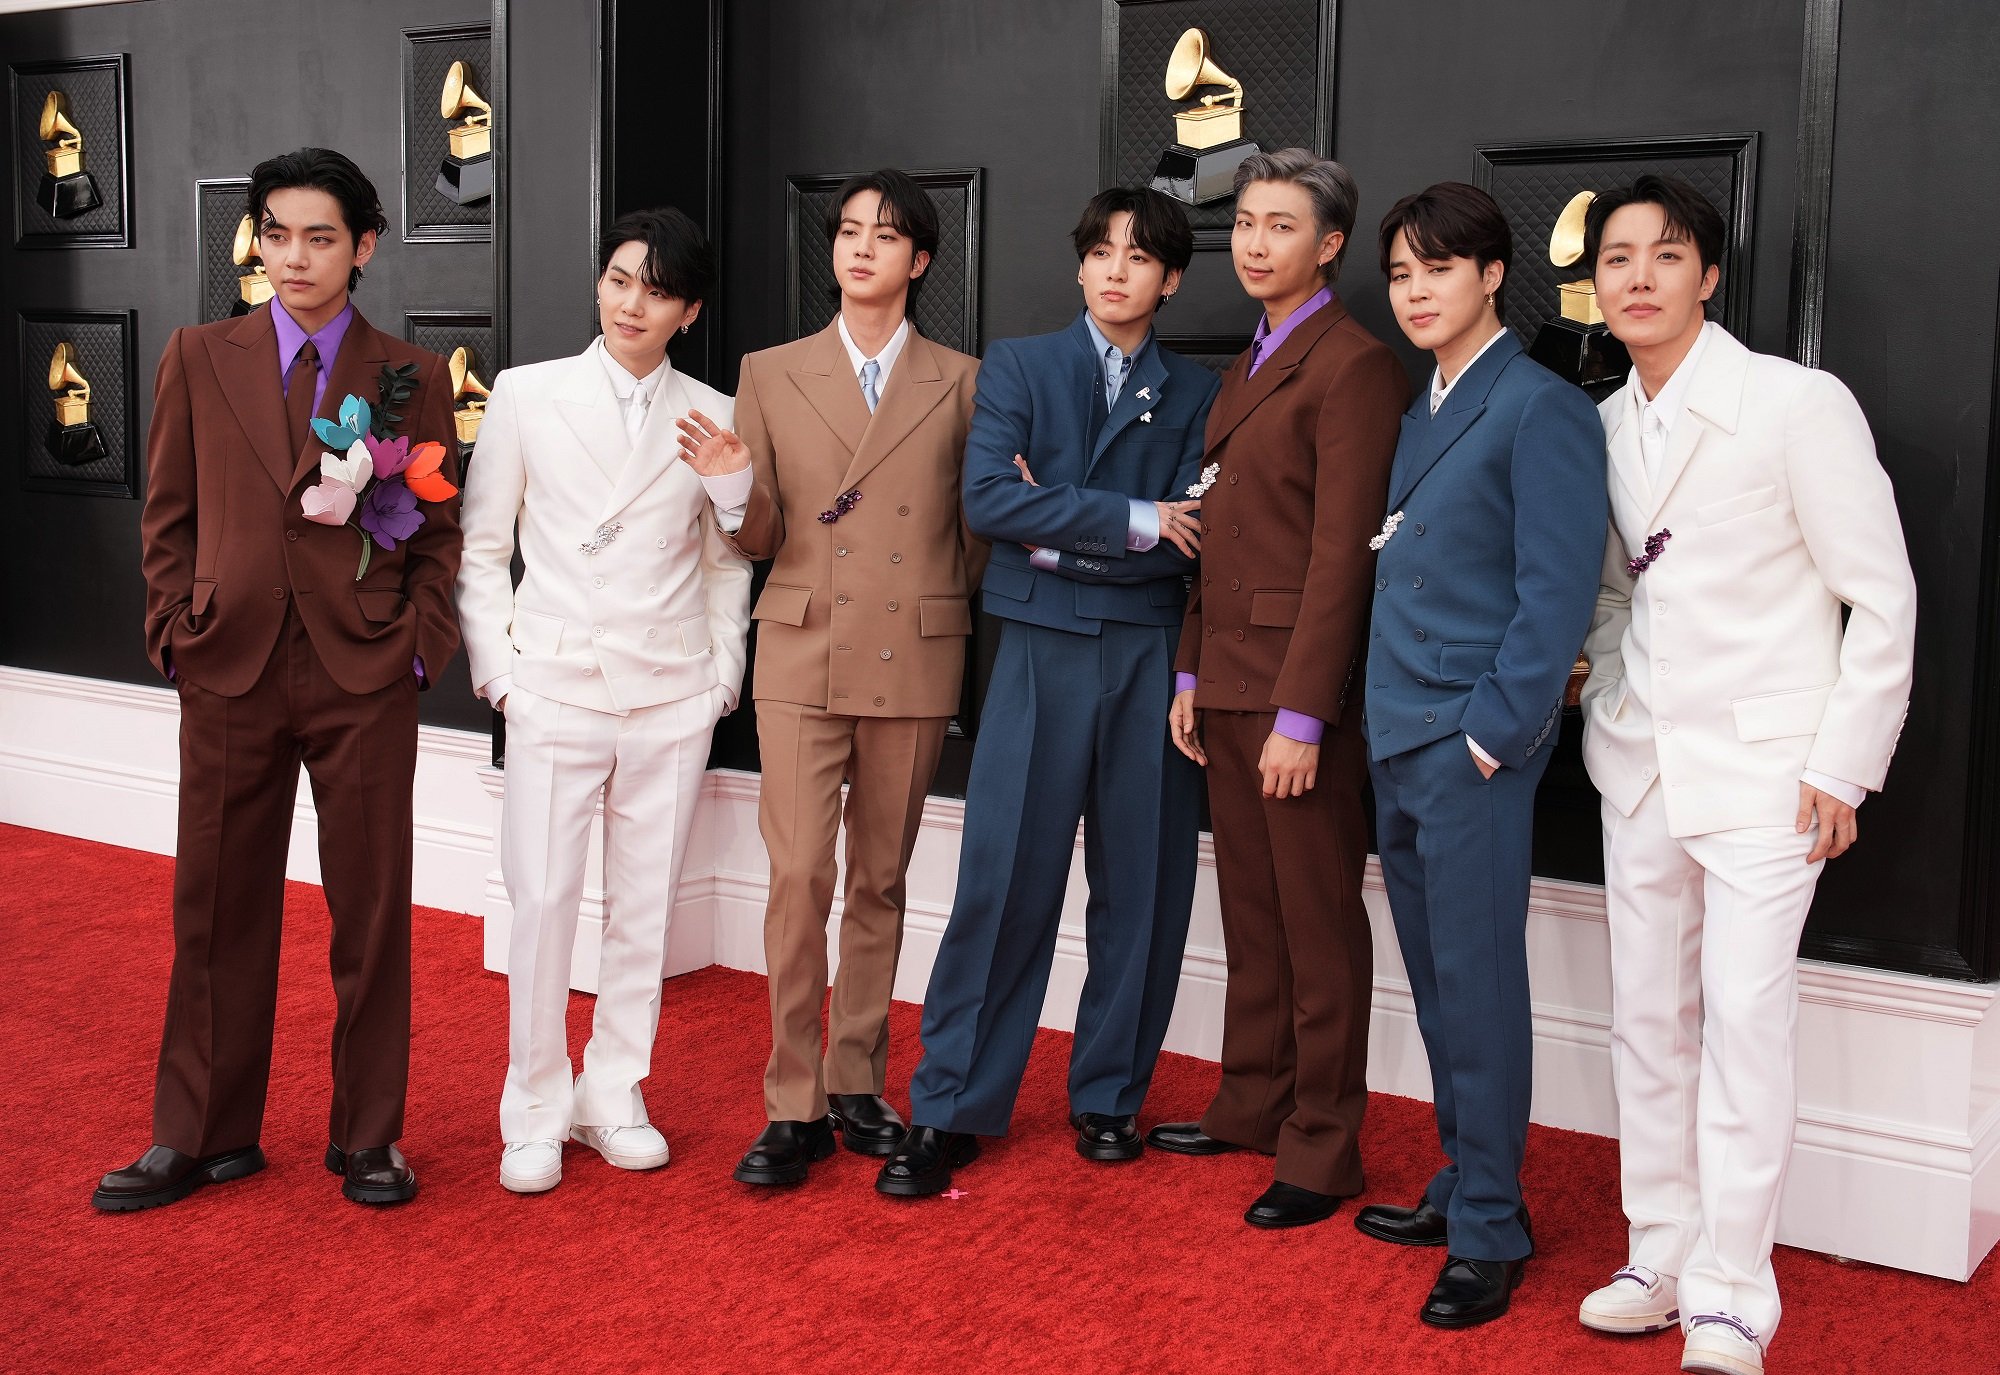 V, Suga, Jin, Jungkook, RM, Jimin, and J-Hope of BTS stand on the red carpet at the 2022 Grammy Awards